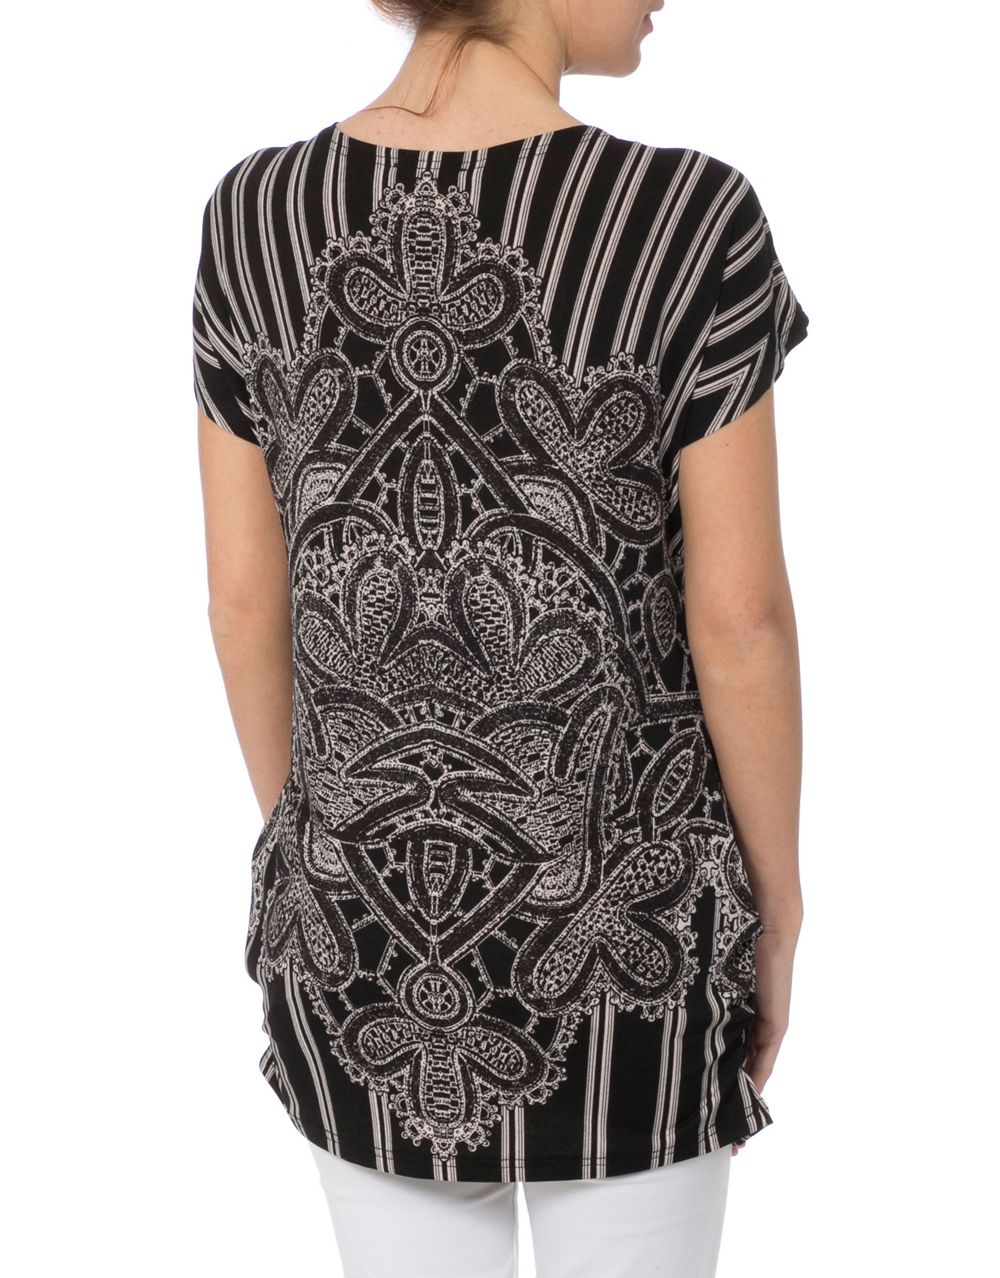 Monochrome Placement Printed Tunic